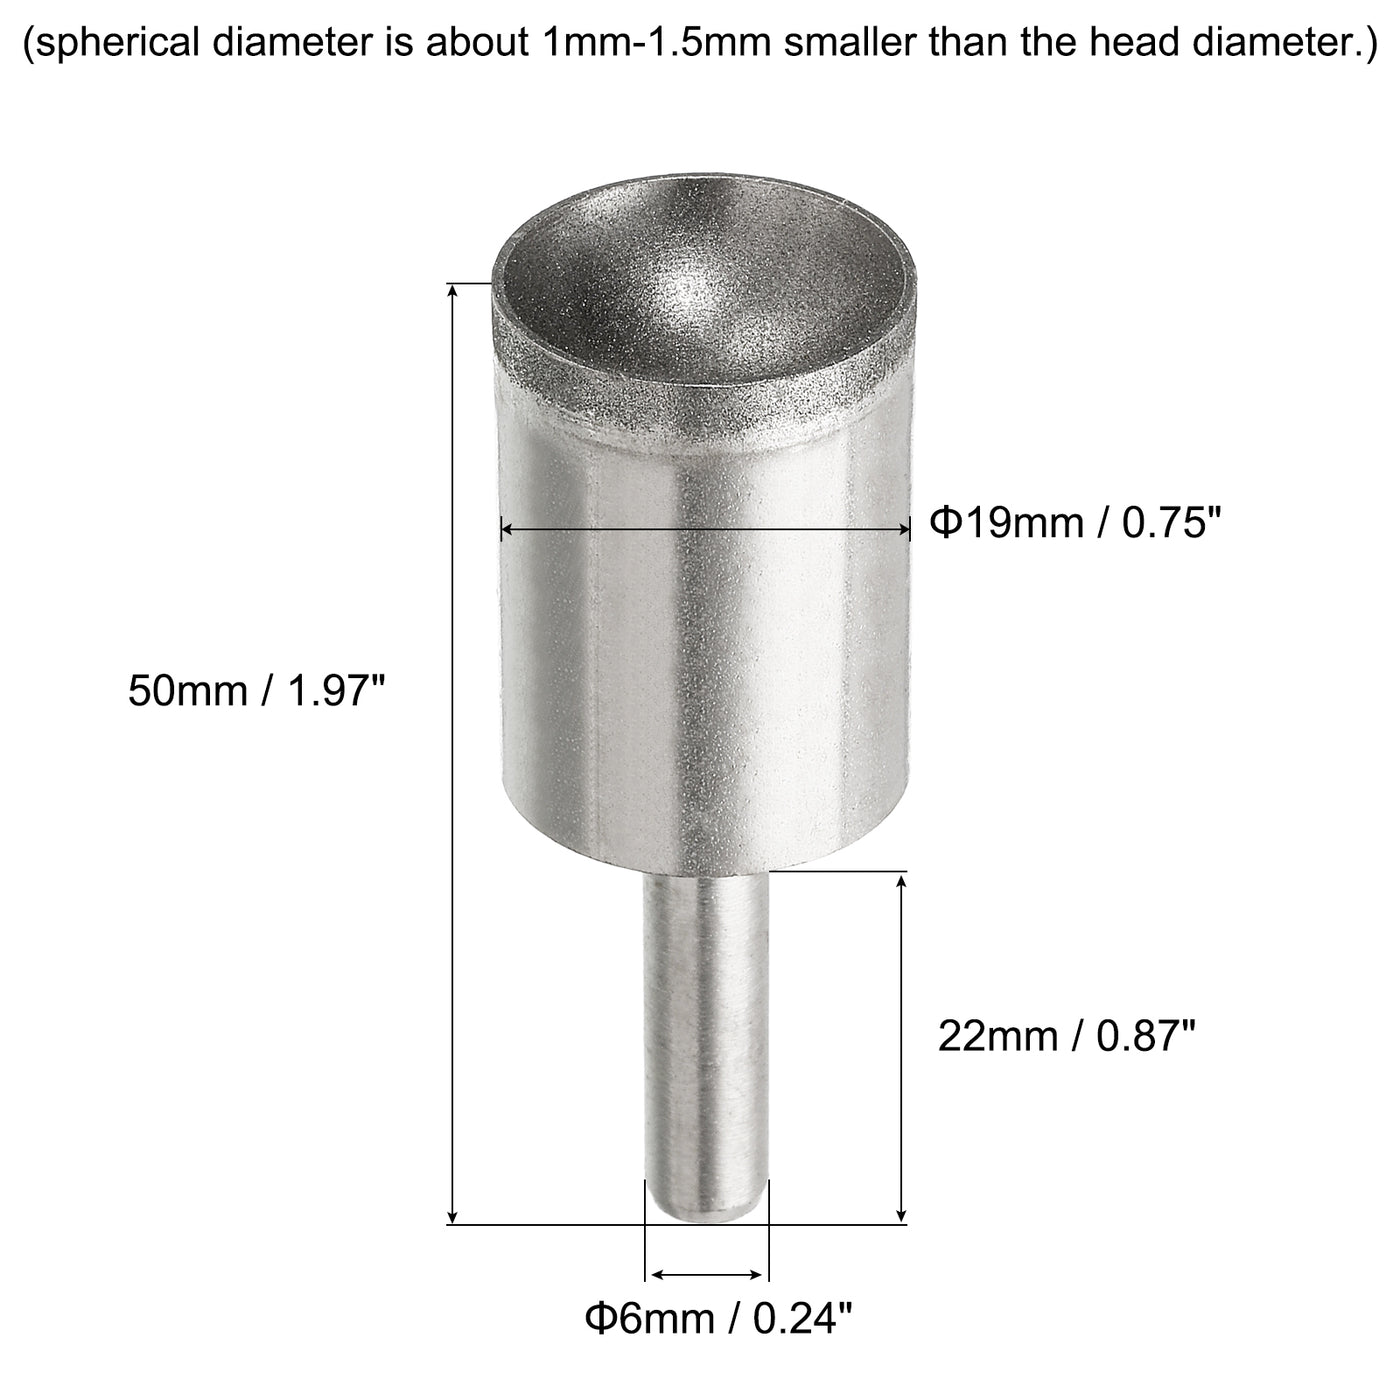 uxcell Uxcell 19mm 600 Grits Diamond Mounted Point Spherical Concave Head Bead Grinding Bit